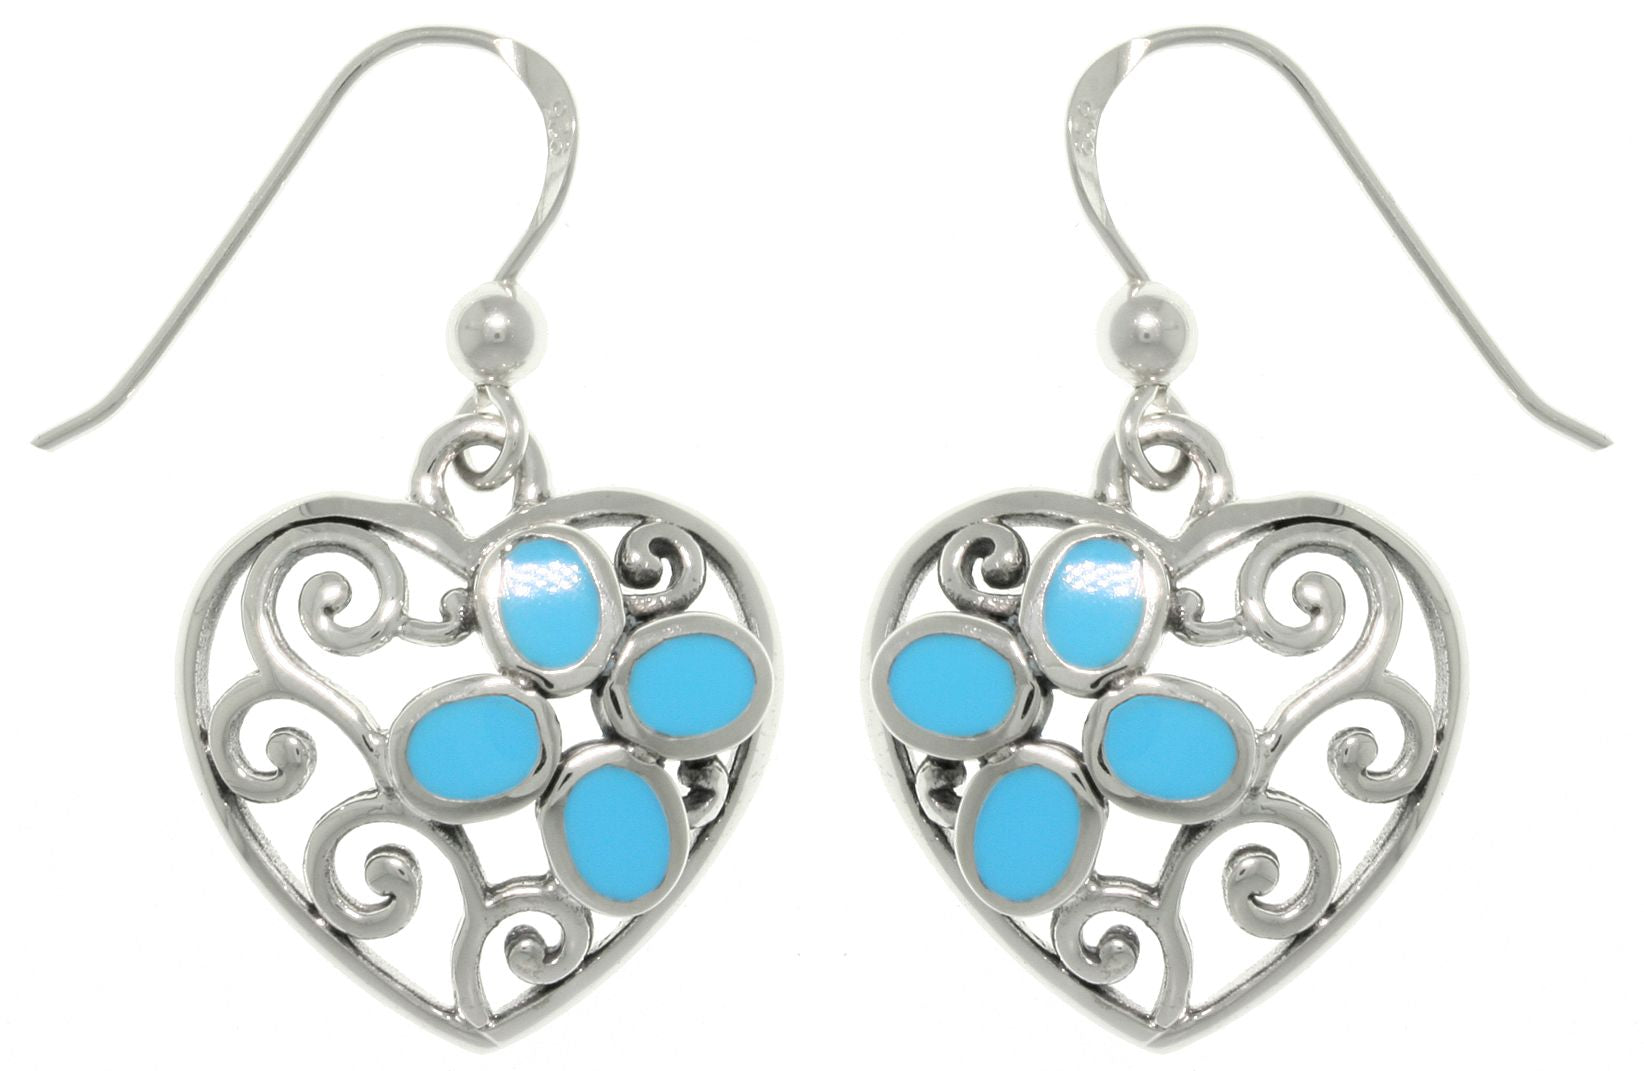 Jewelry Trends Sterling Silver Filigree Heart with Created Turquoise Dangle Earrings